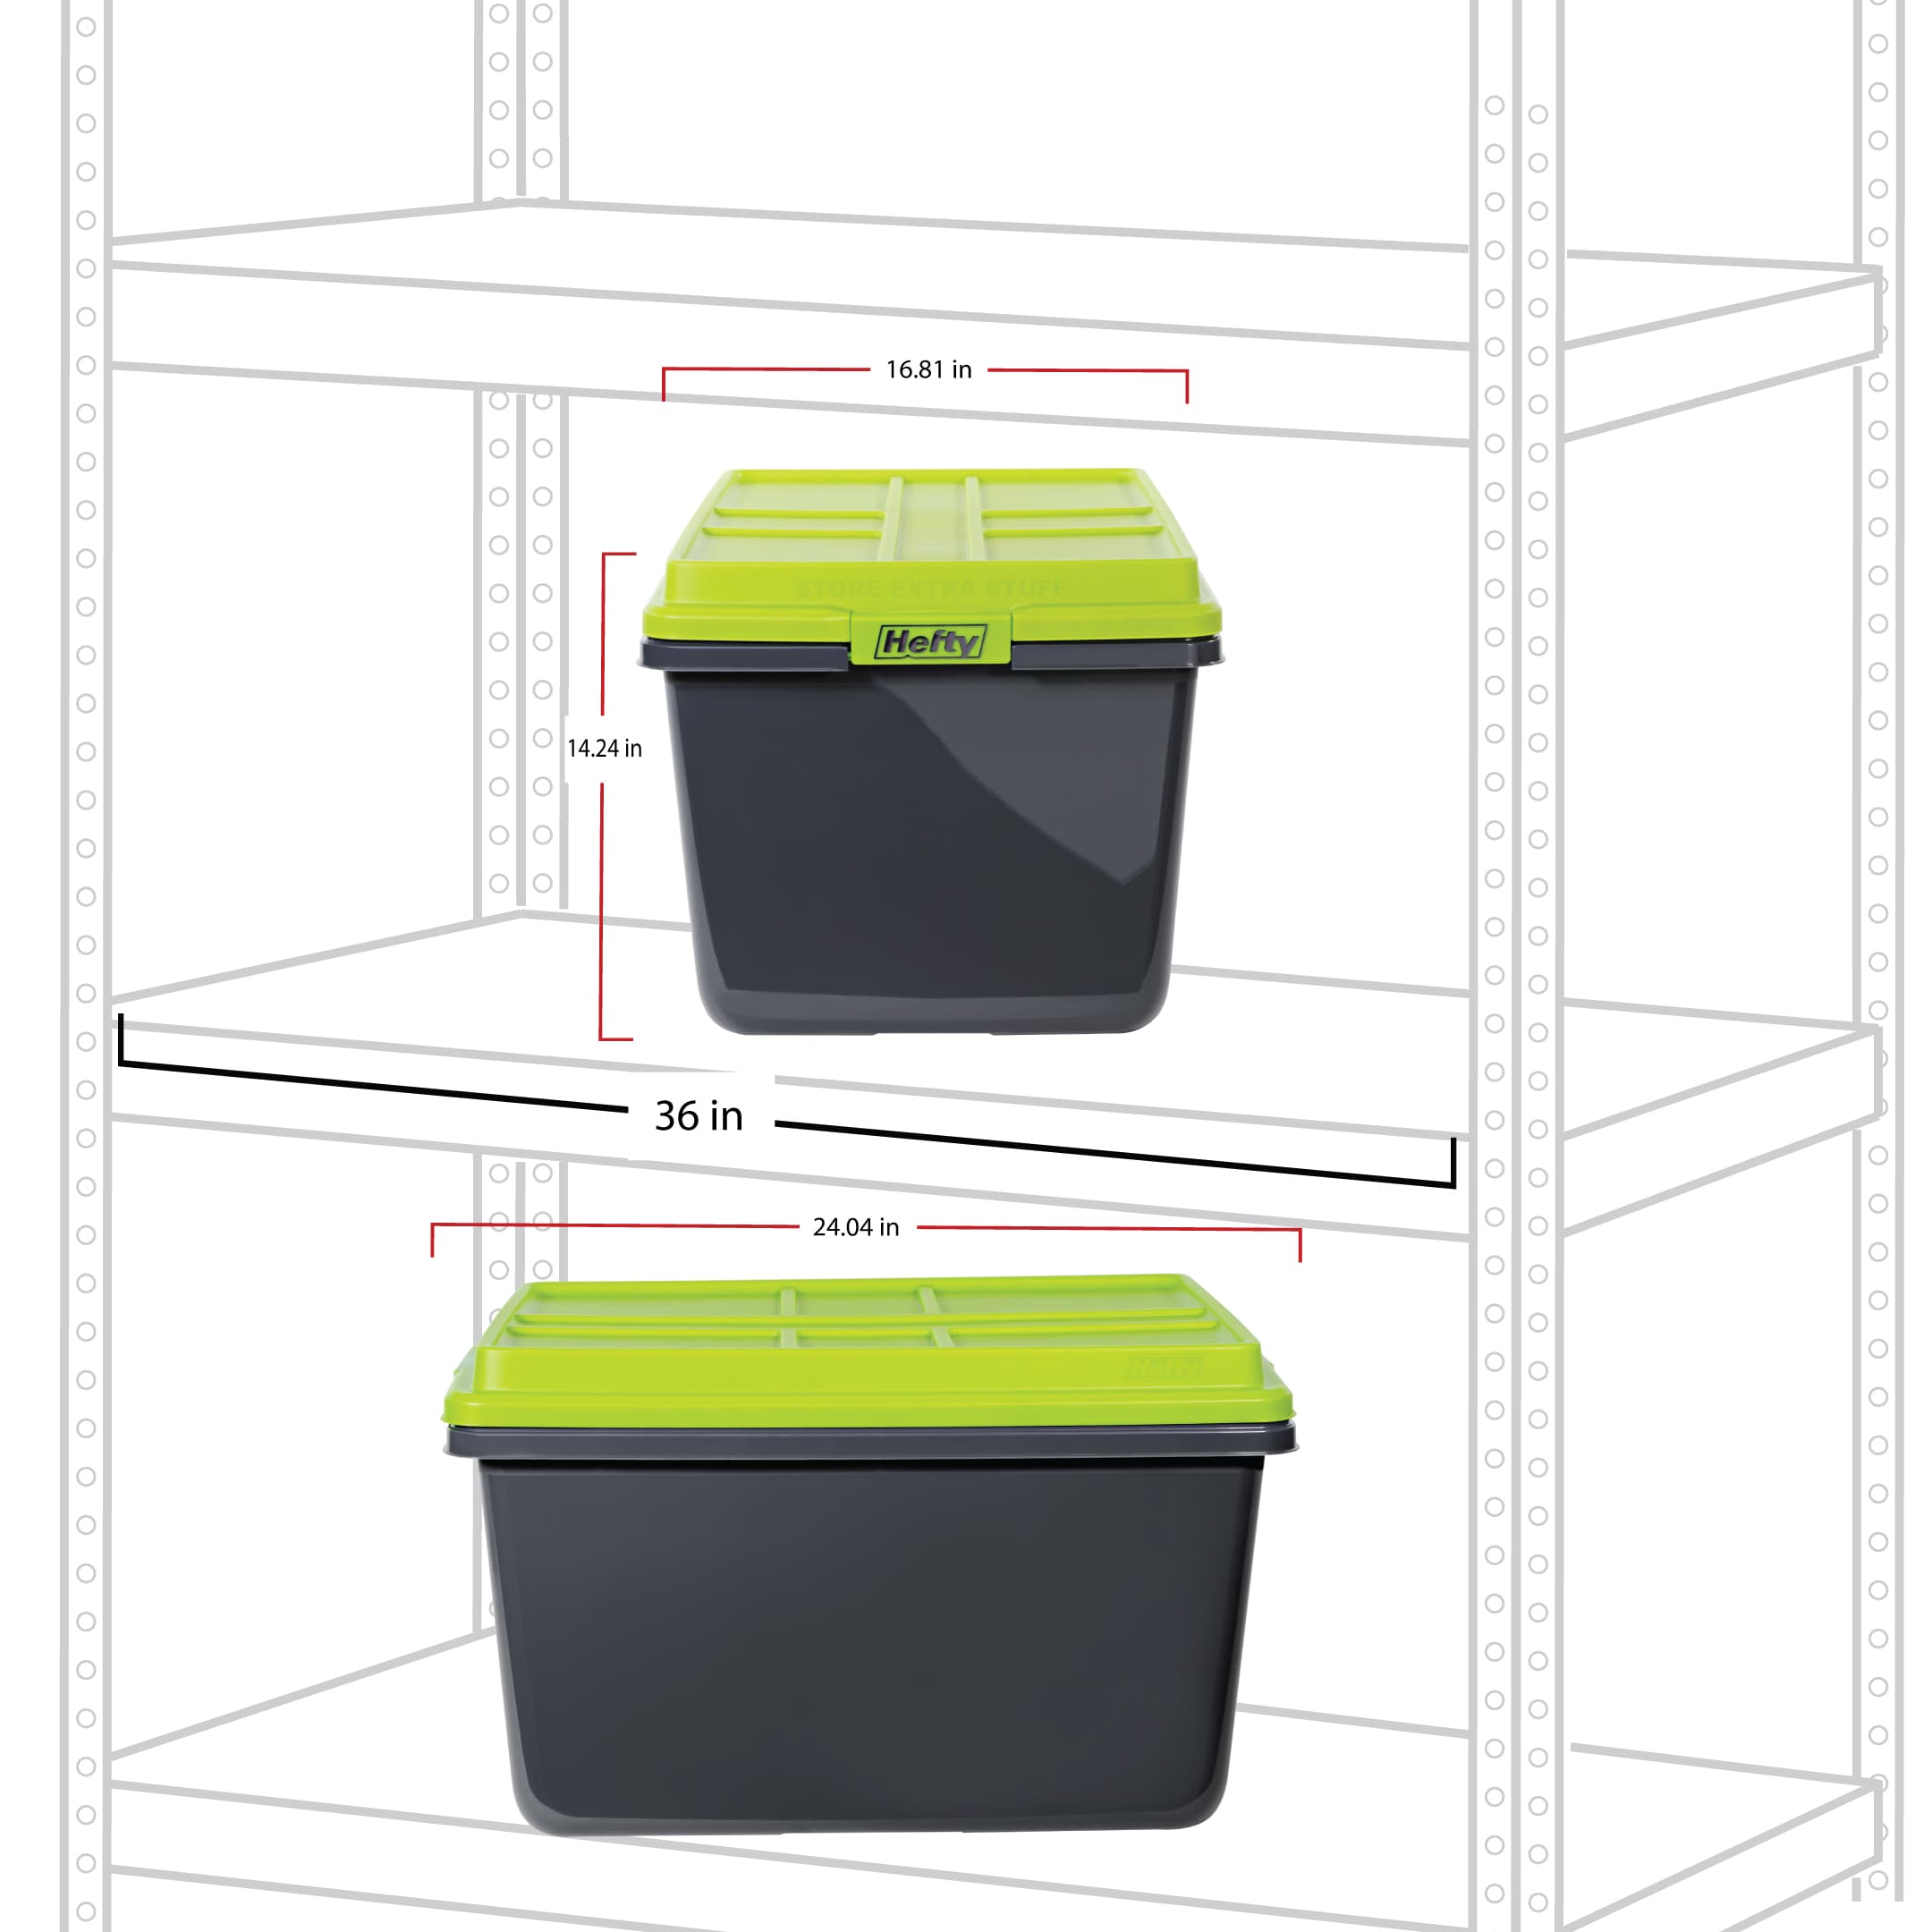 Hefty Hi Rise Storage Tote with Lid and Foil Green/Gold 18 gal